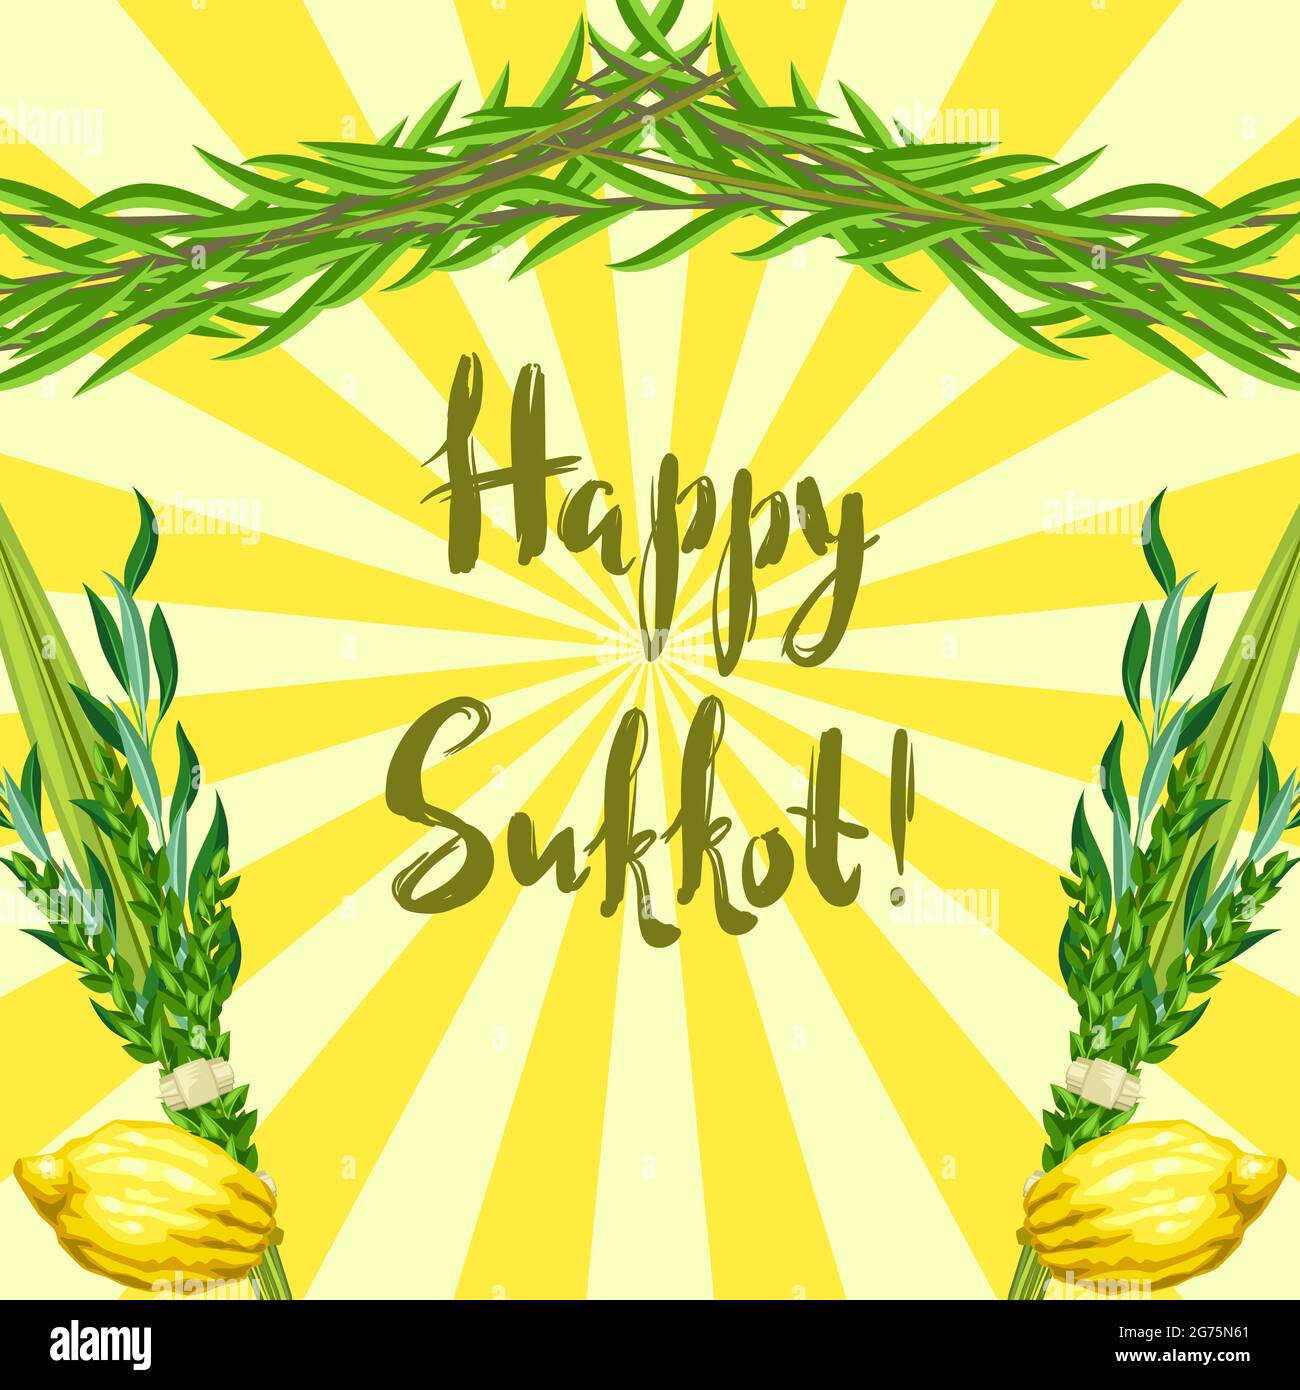 Happy Sukkot greeting card. Holiday background with Jewish festival traditional symbols. Stock Vector